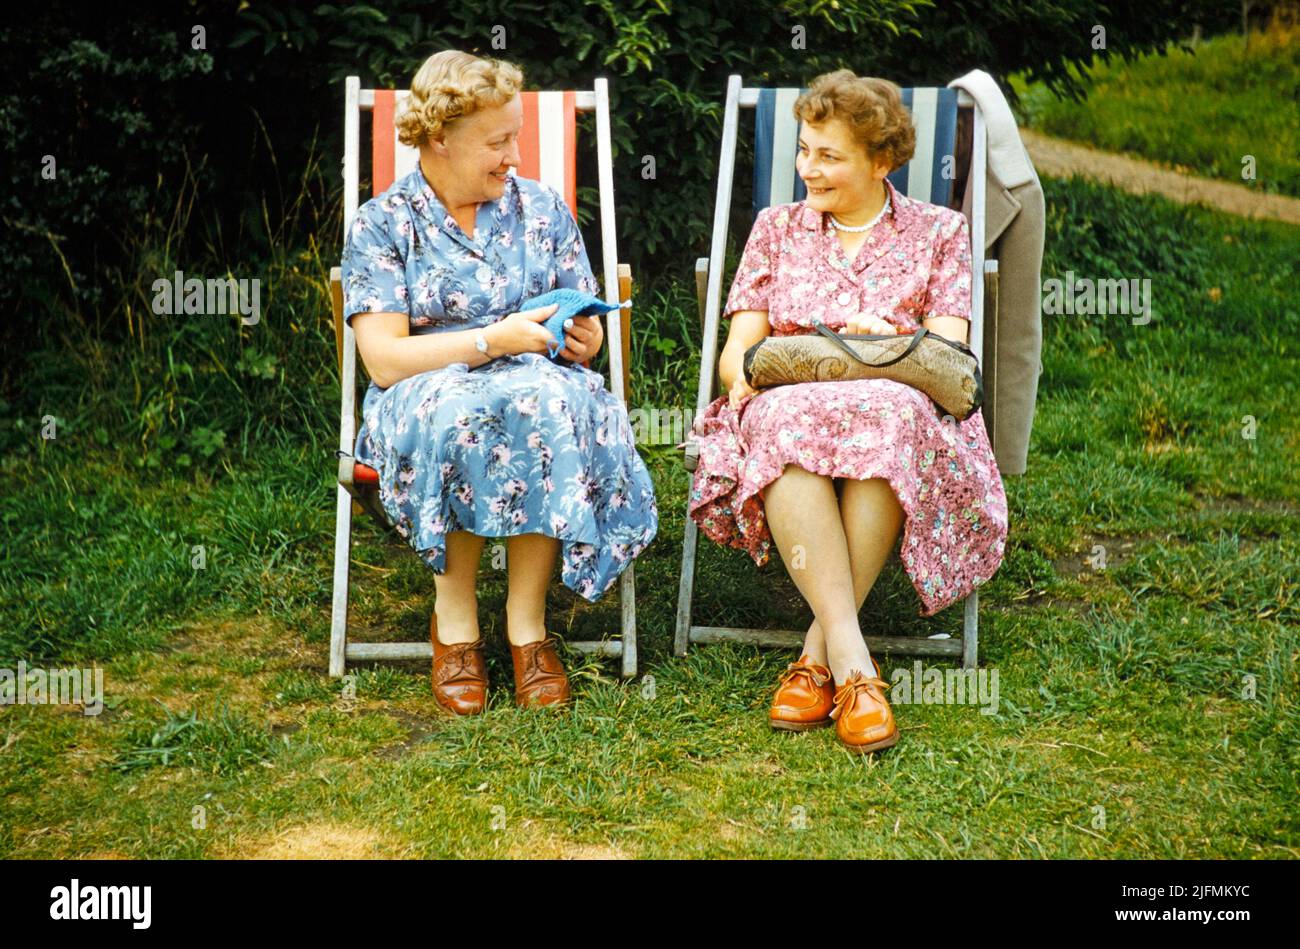 Two women friends sitting in deckchairs on grass lawn one knitting, smiling at each other,  England, UK early 1960s Stock Photo